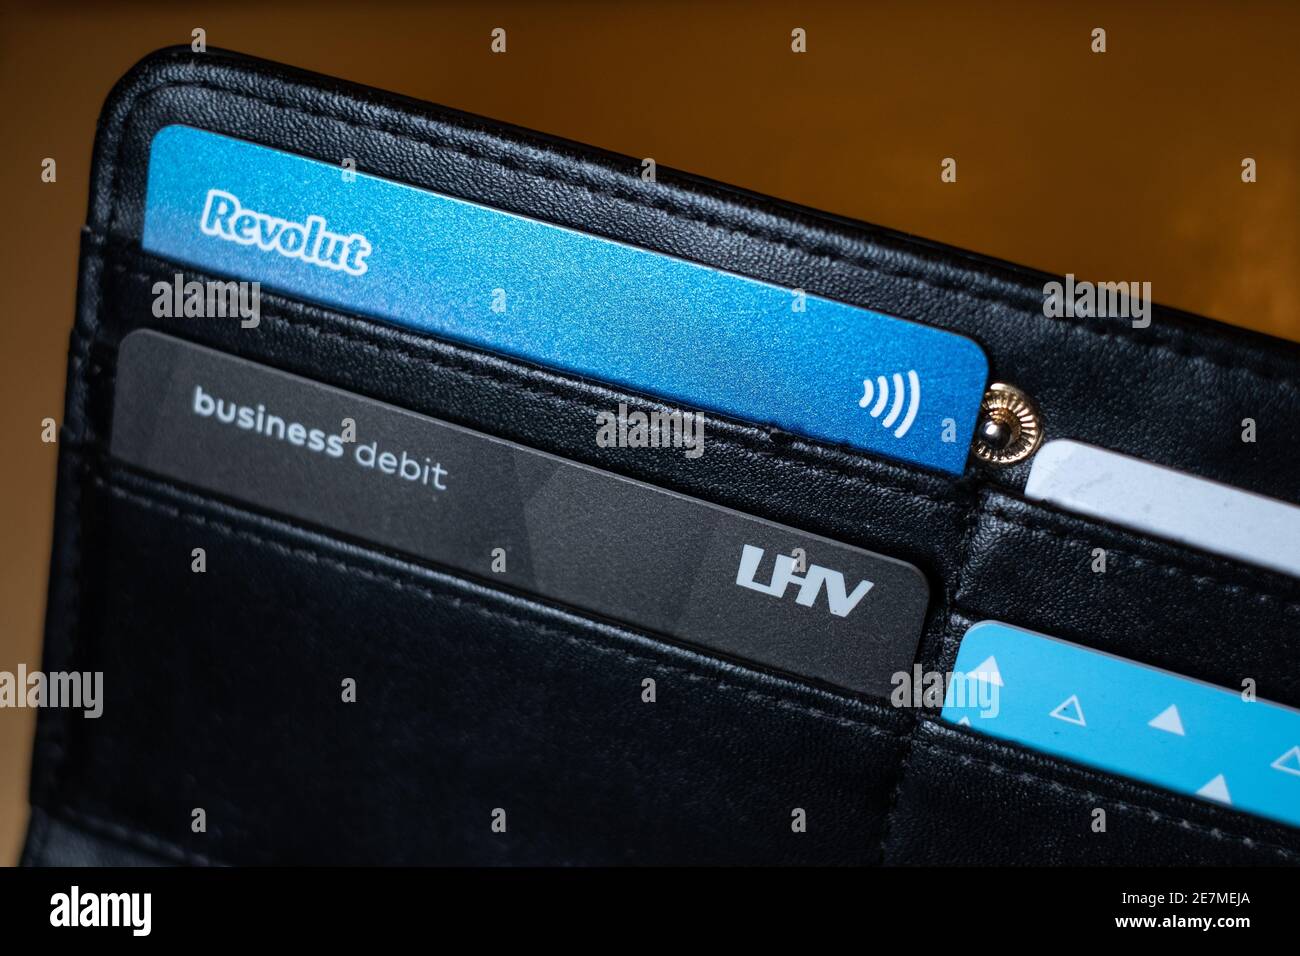 Revolut and LHV business bank cards in black wallet. Revolut is UK based global fin tech company. LHV is Estonian banking and financial company Stock Photo